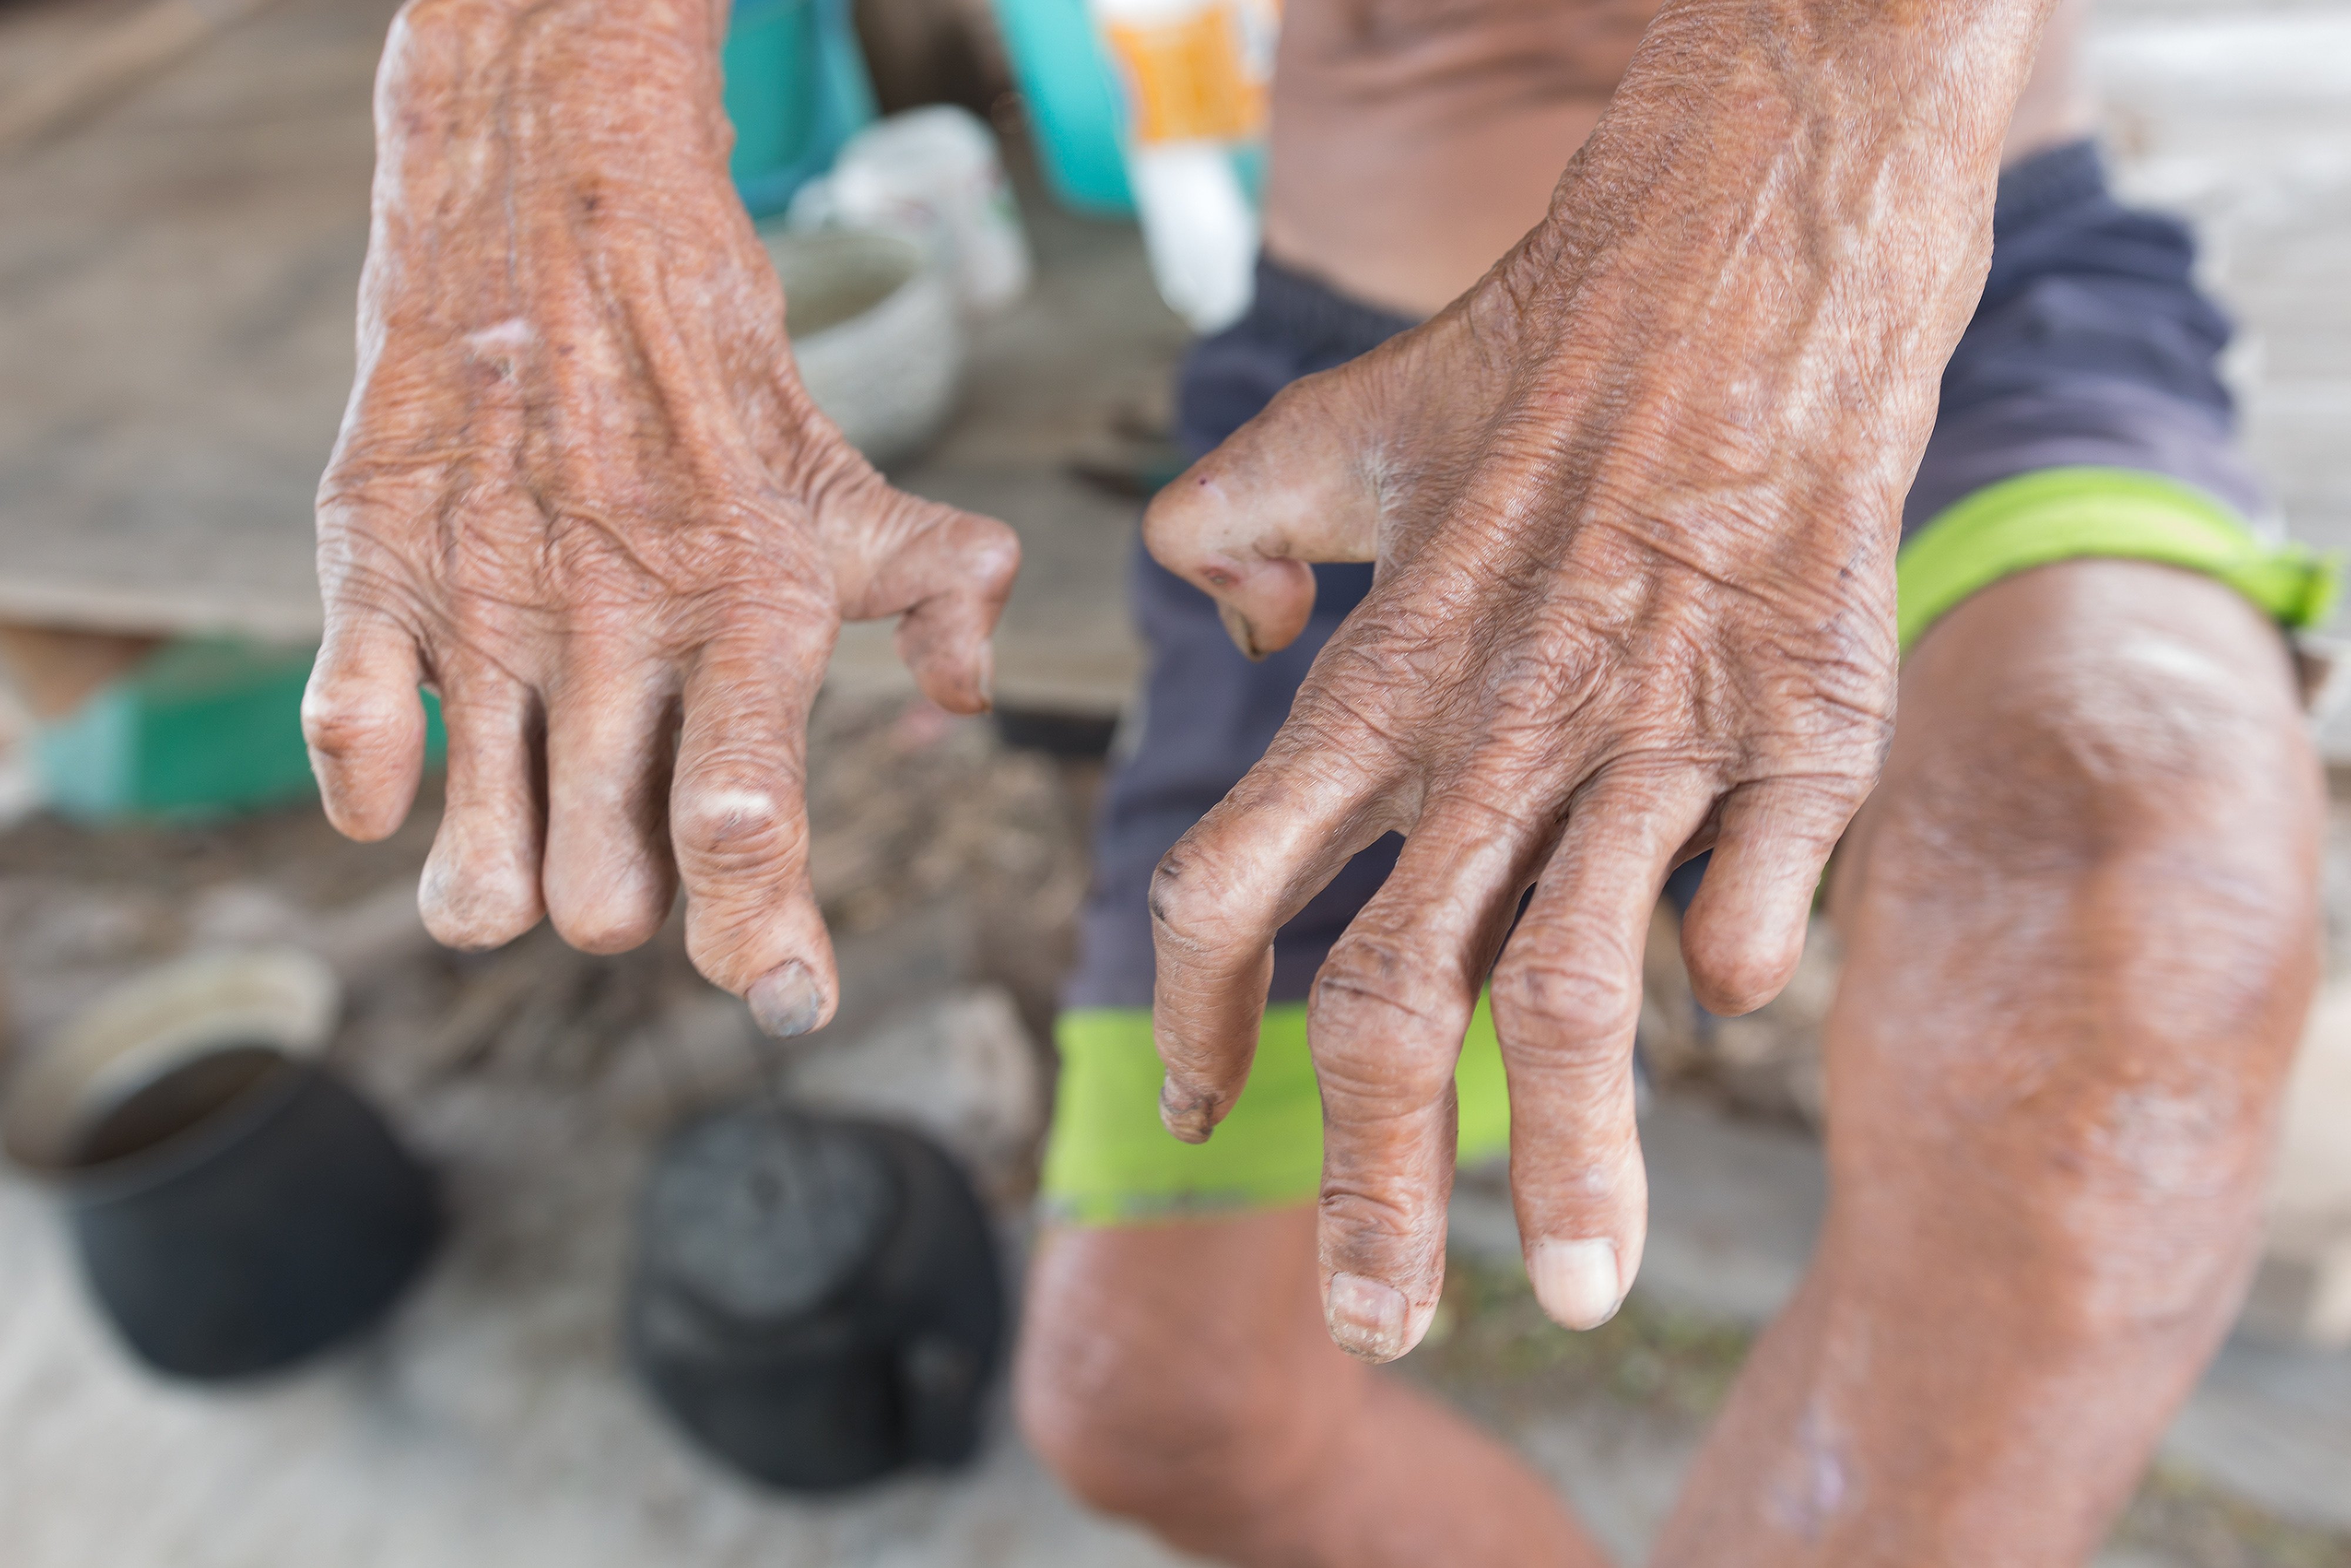 Leprosy, if untreated, can damage nerves, meaning a sufferer is less likely to react to pain, from burns, say, or pressure - which can destroy tissue. We look at the disease’s symptoms, treatment, transmission and stigma, and whether it’s contagious or curable. Photo: Shutterstock 